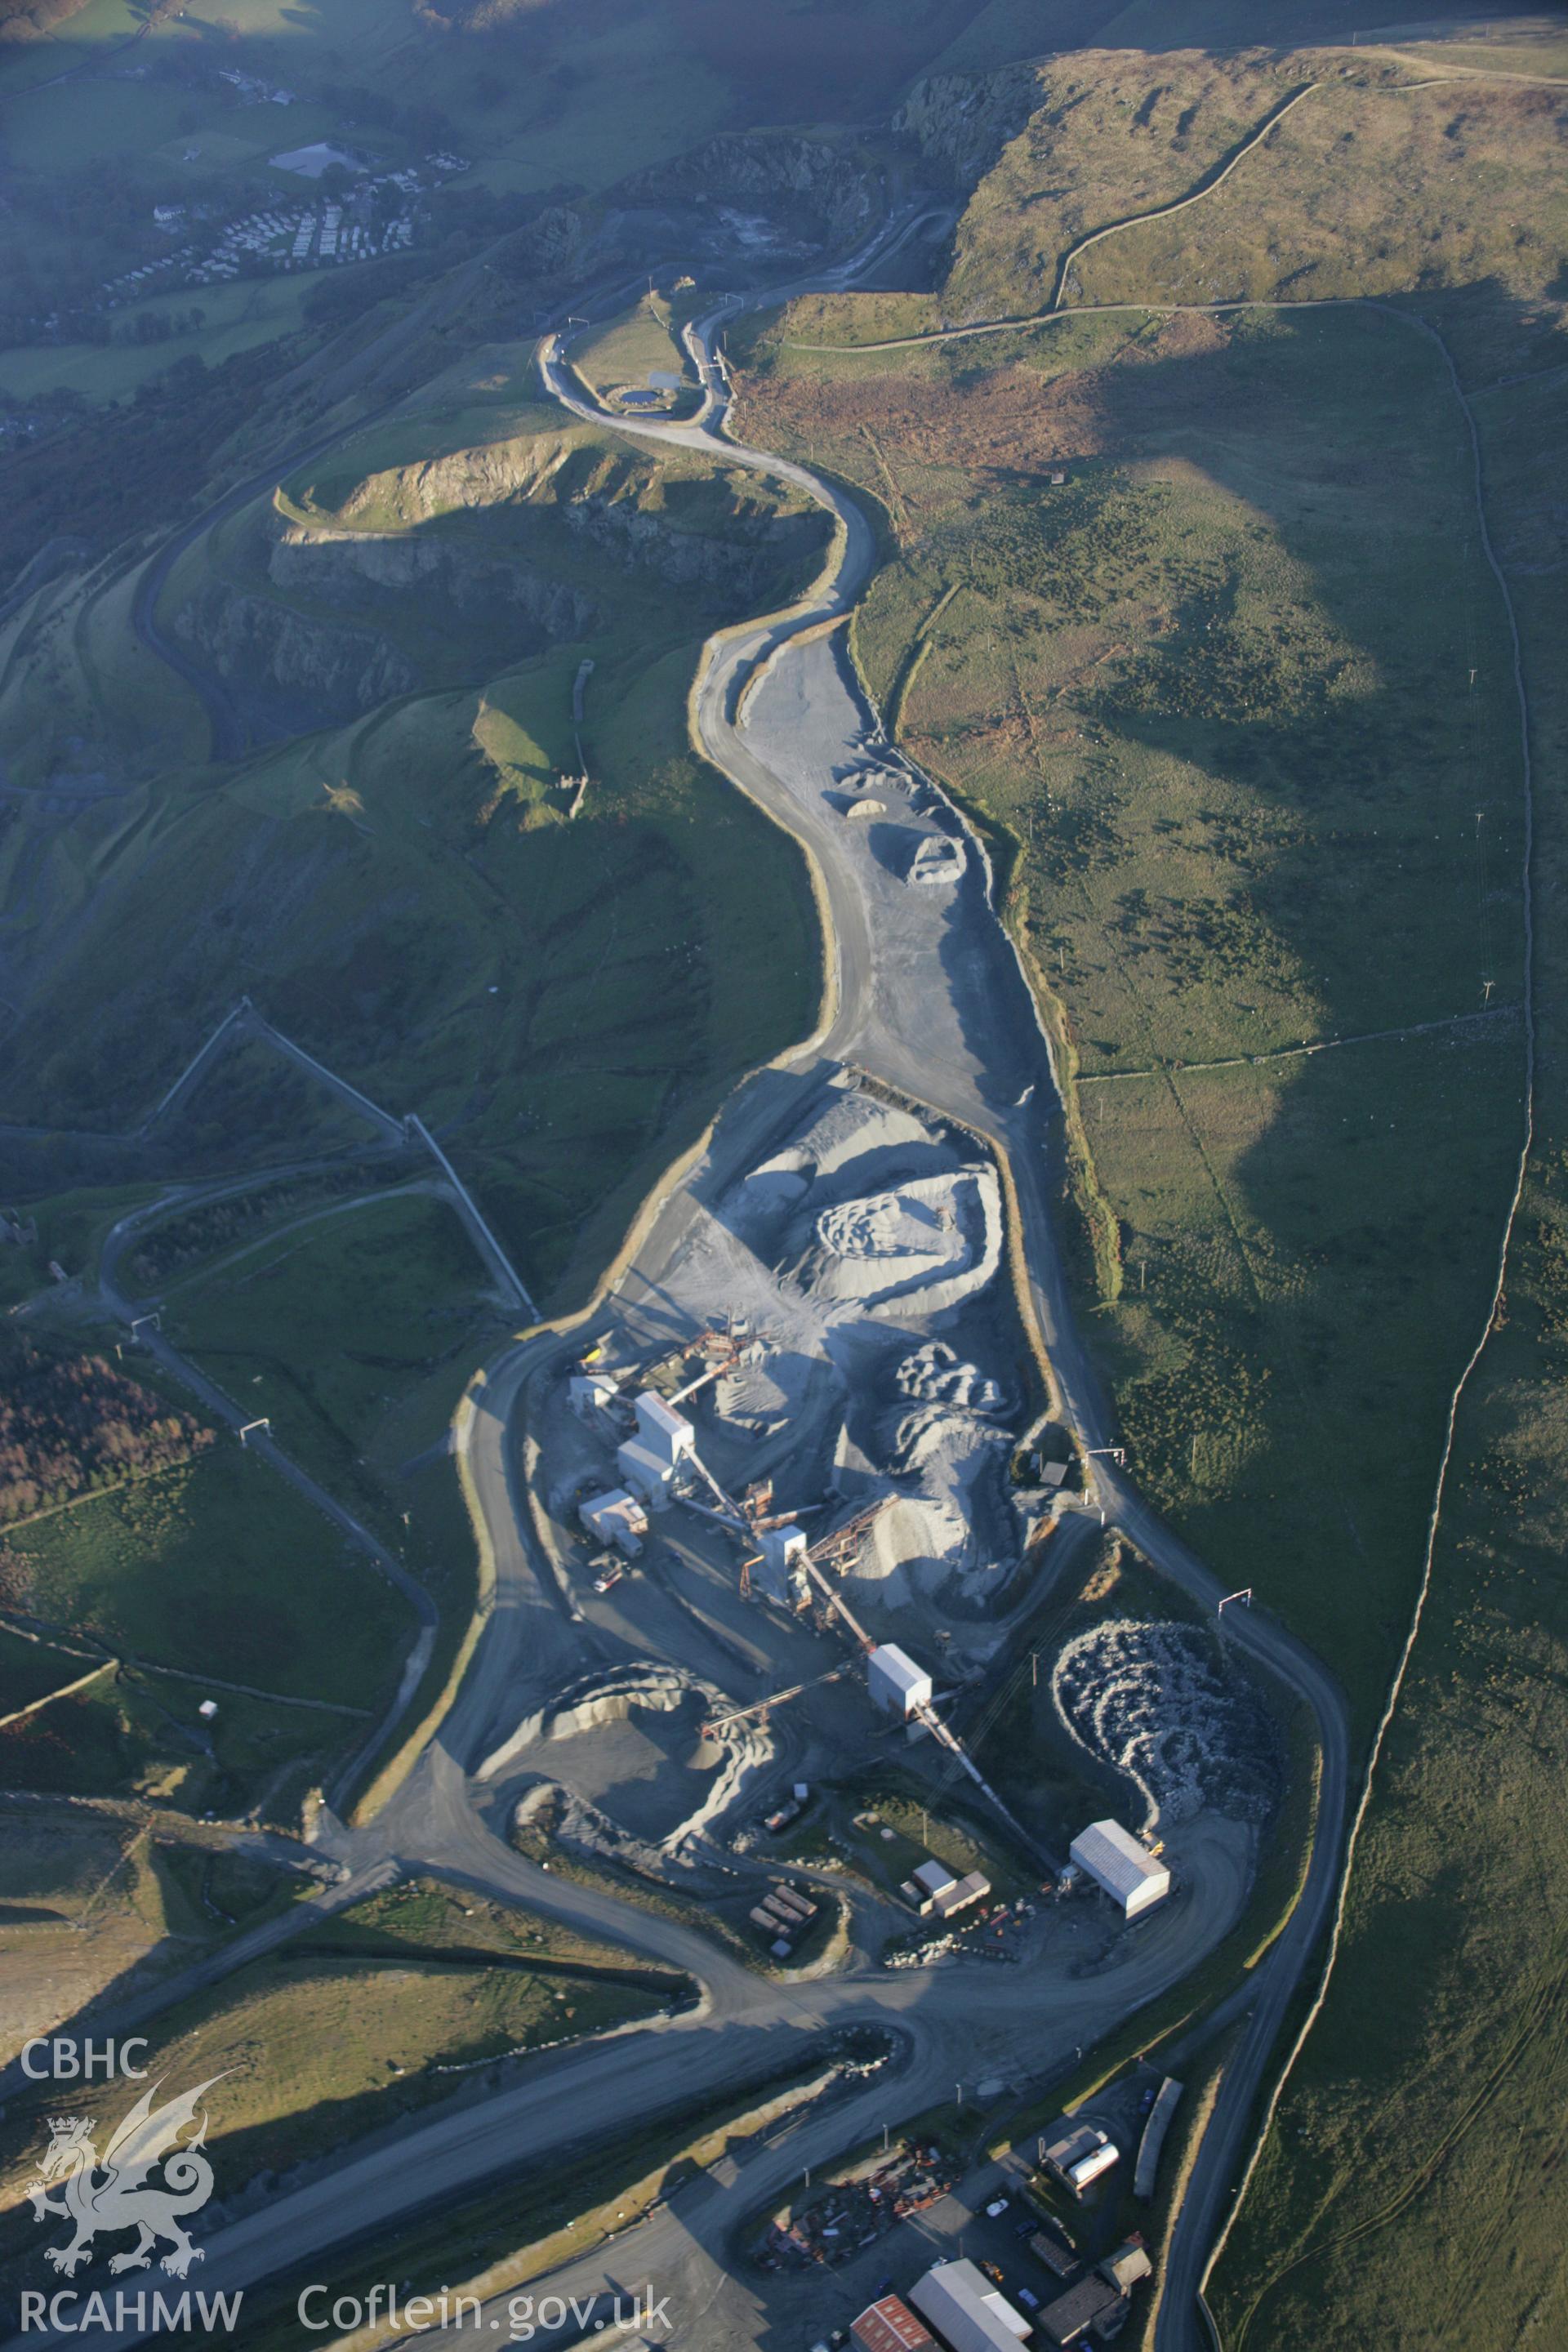 RCAHMW colour oblique aerial photograph of Penmaenmawr Stone Quarry, viewed from the west. Taken on 21 November 2005 by Toby Driver